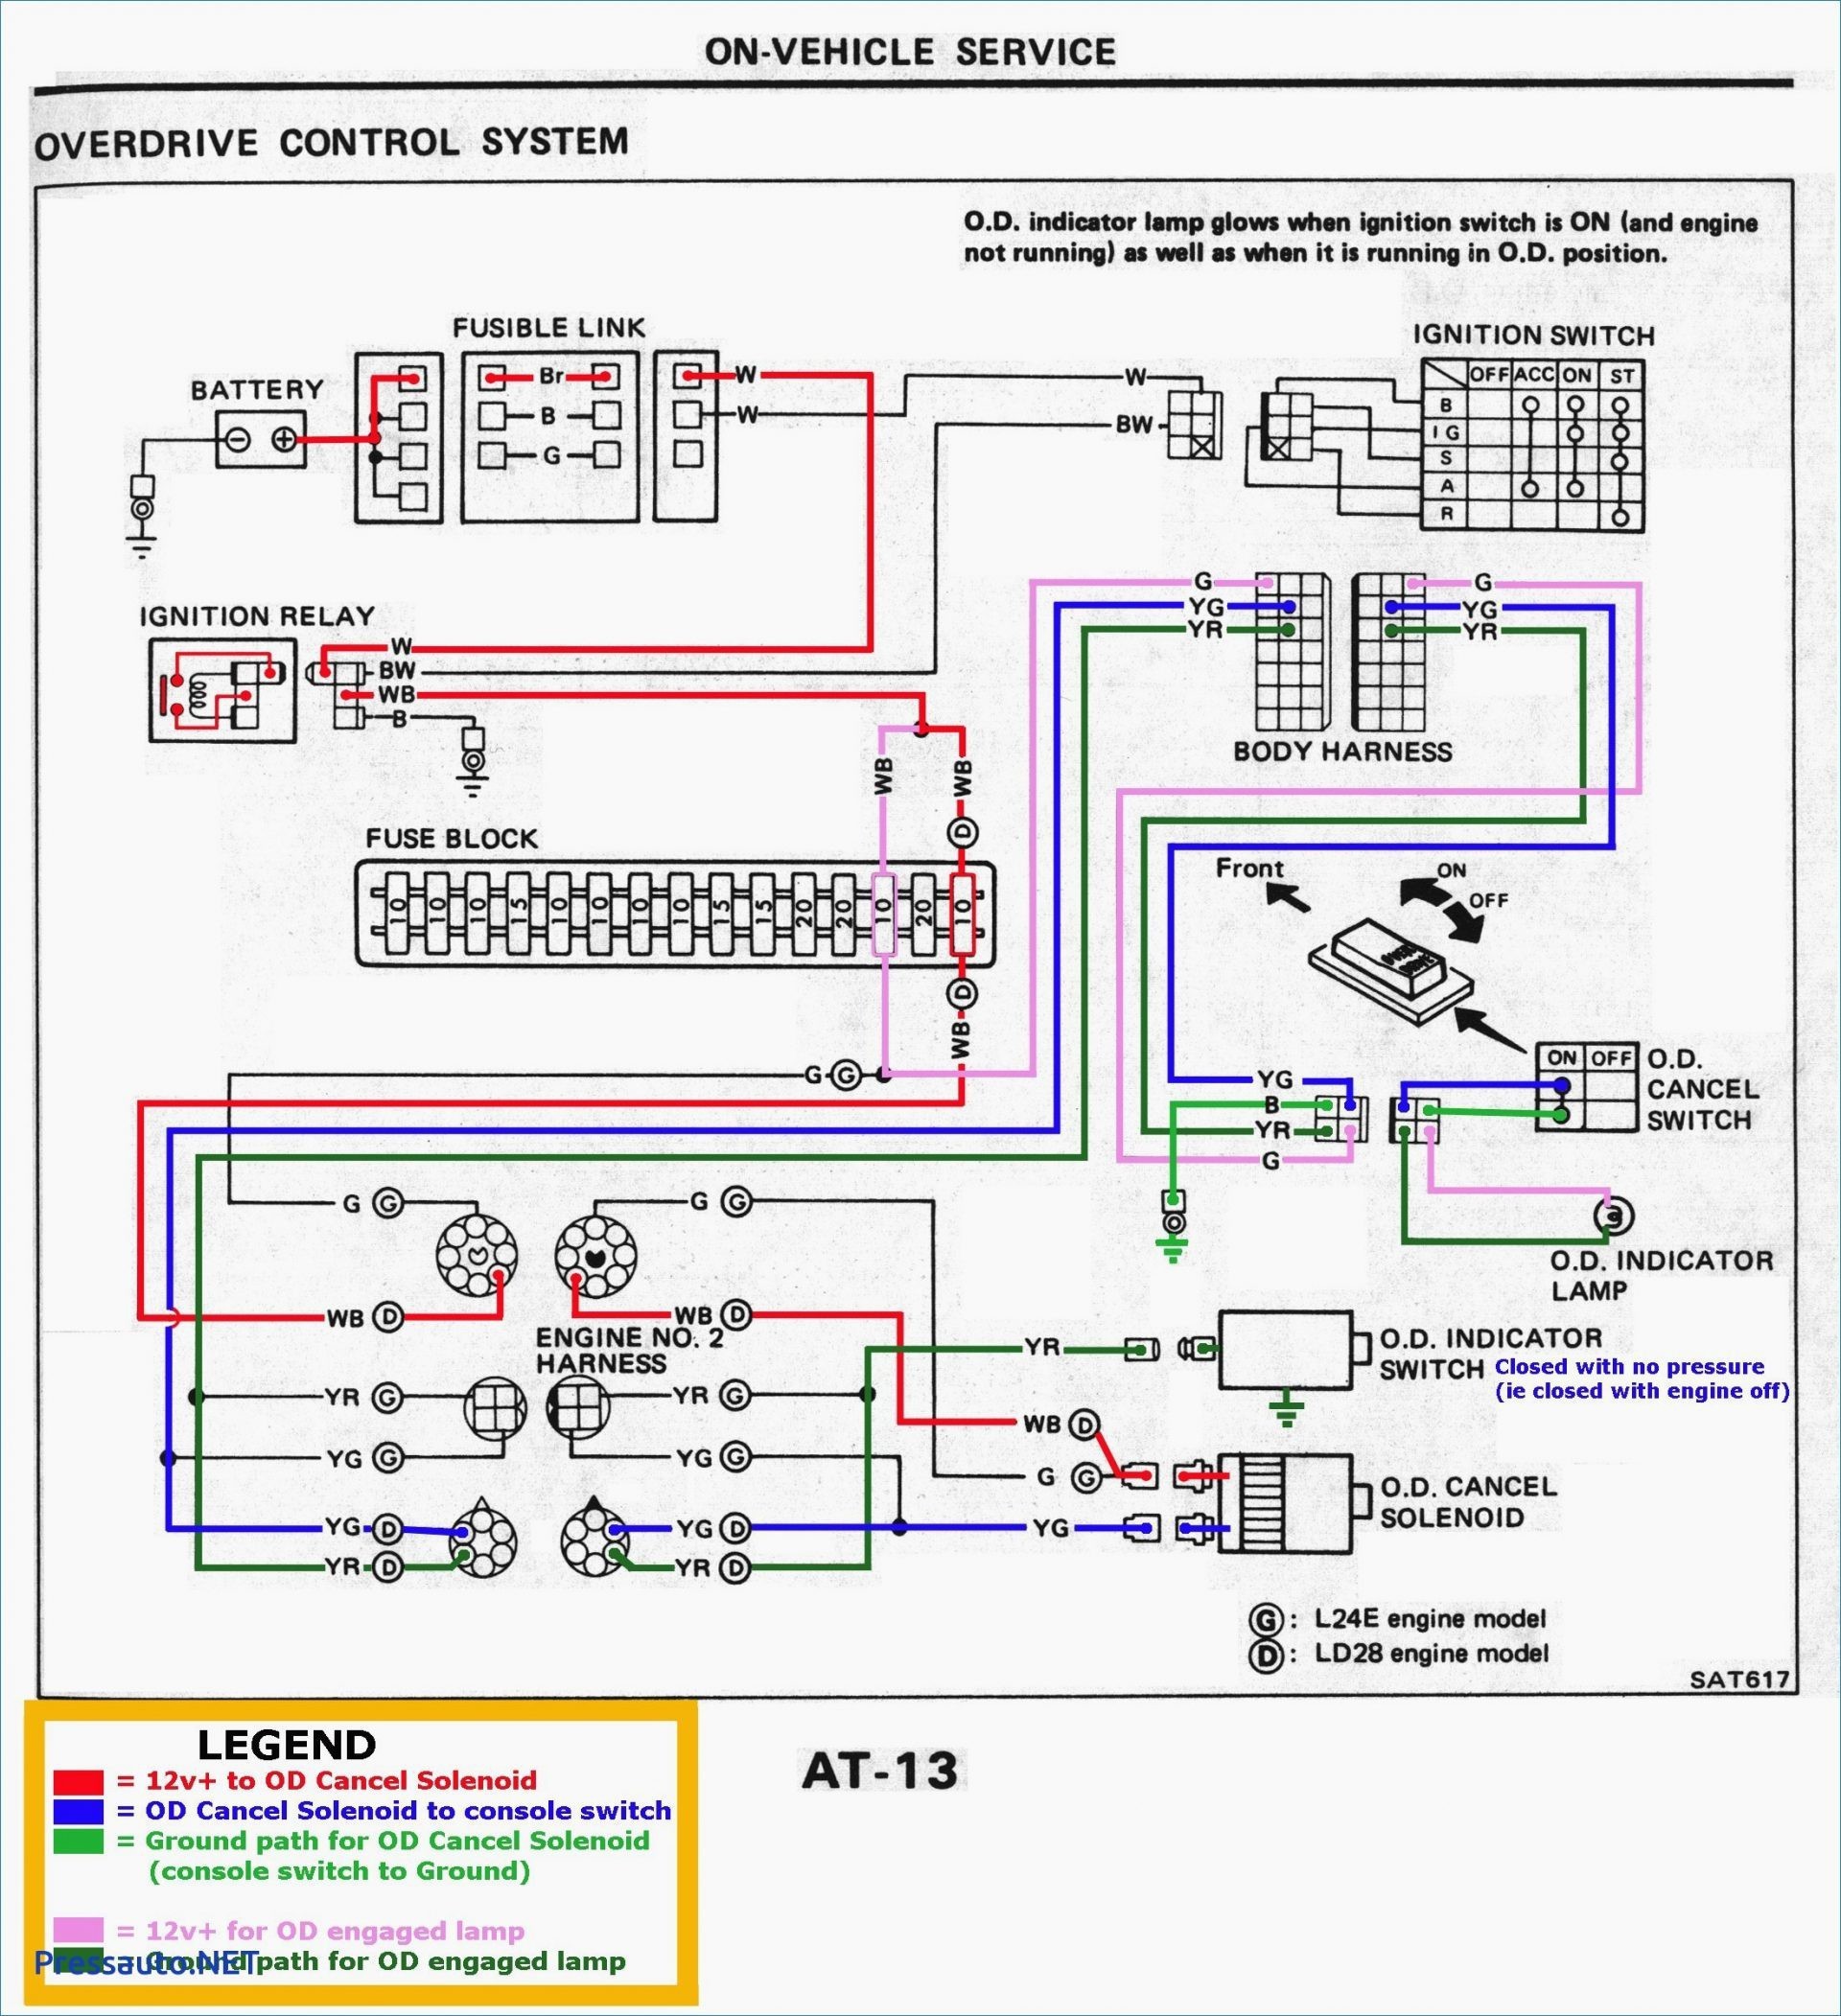 Wiring Diagram Trailer Led Lights Valid Trailer Light Harness Diagram Luxury Tail Light Wiring Diagram Chevy